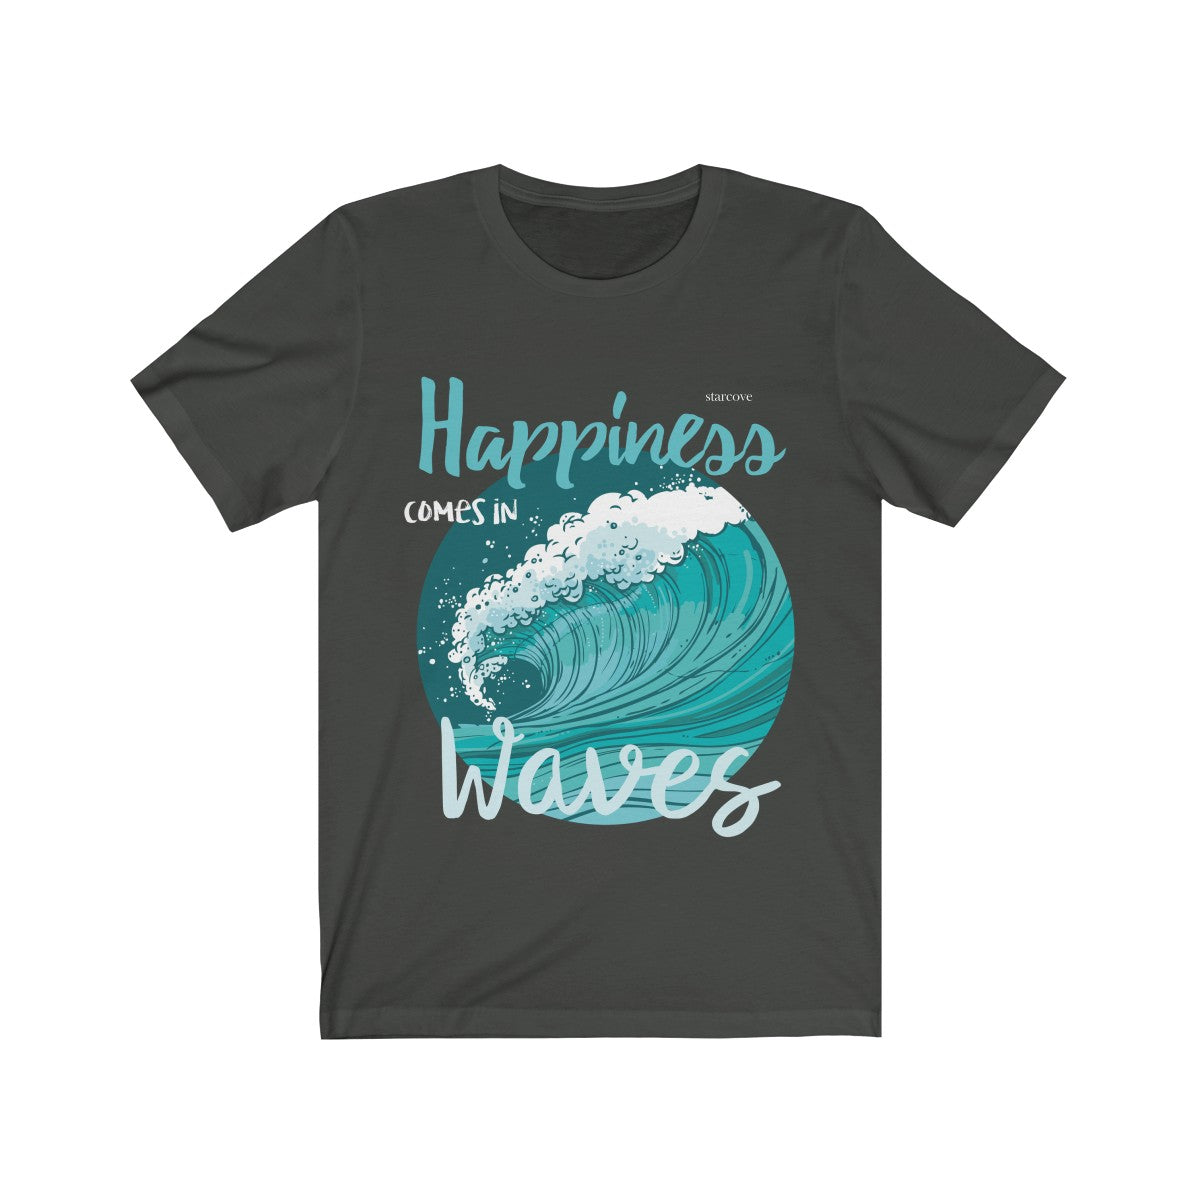 Happiness Comes In Waves Shirt, Art Motivational Positive Quote Funny Ocean Sea Summer Vacation Beach Lover Women Men Tshirt Top Gift Starcove Fashion